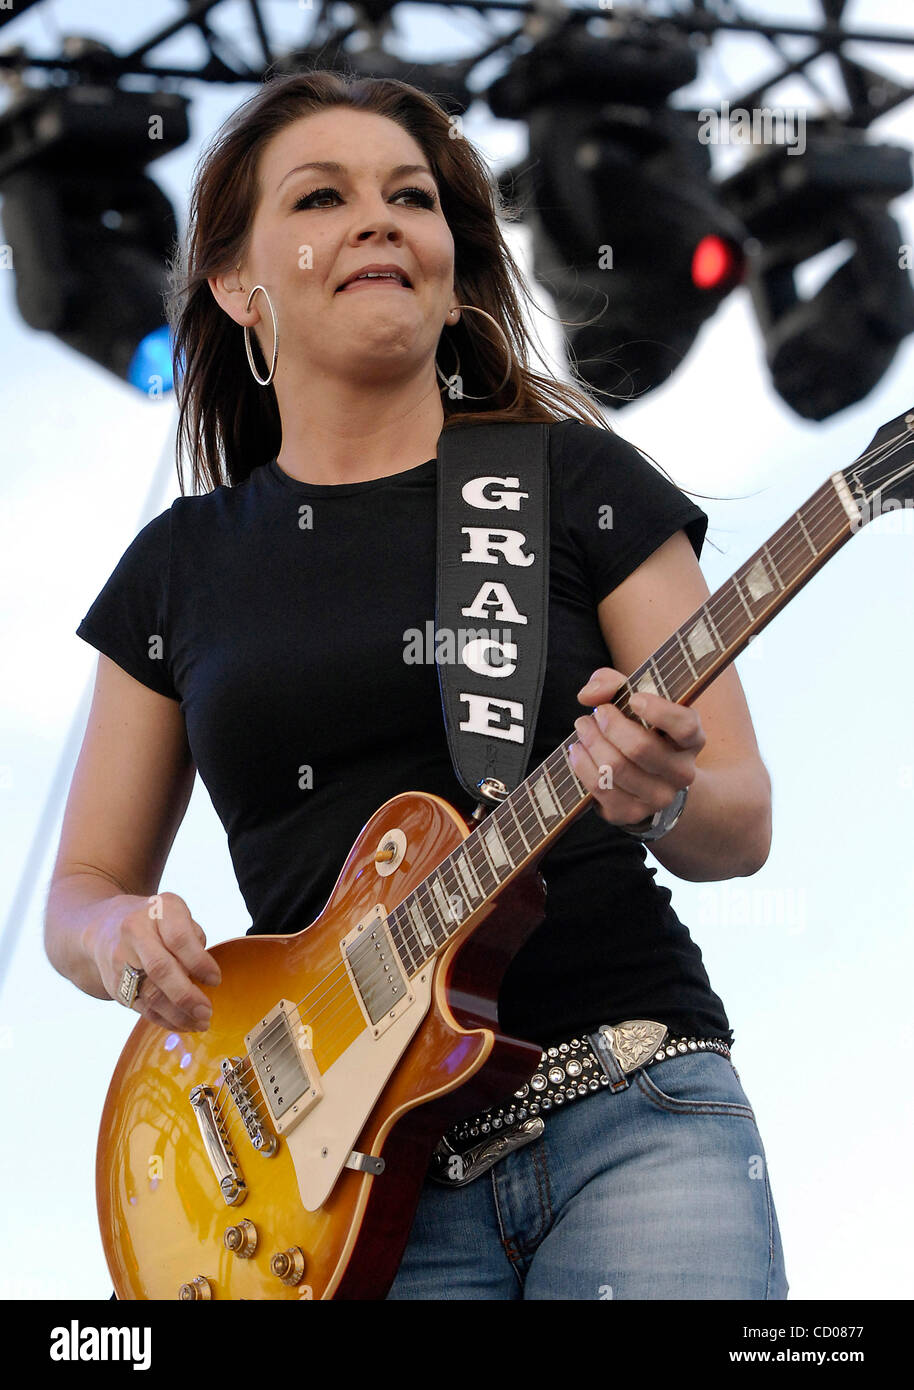 May 4, 2008; Indio, CA, USA; Musician GRETCHEN WILSON performing during the 2008 Stagecoach Country Music Festival at the Empire Polo Club. Mandatory Credit: Photo by Vaughn Youtz/ZUMA Press. (©) Copyright 2007 by Vaughn Youtz. Stock Photo